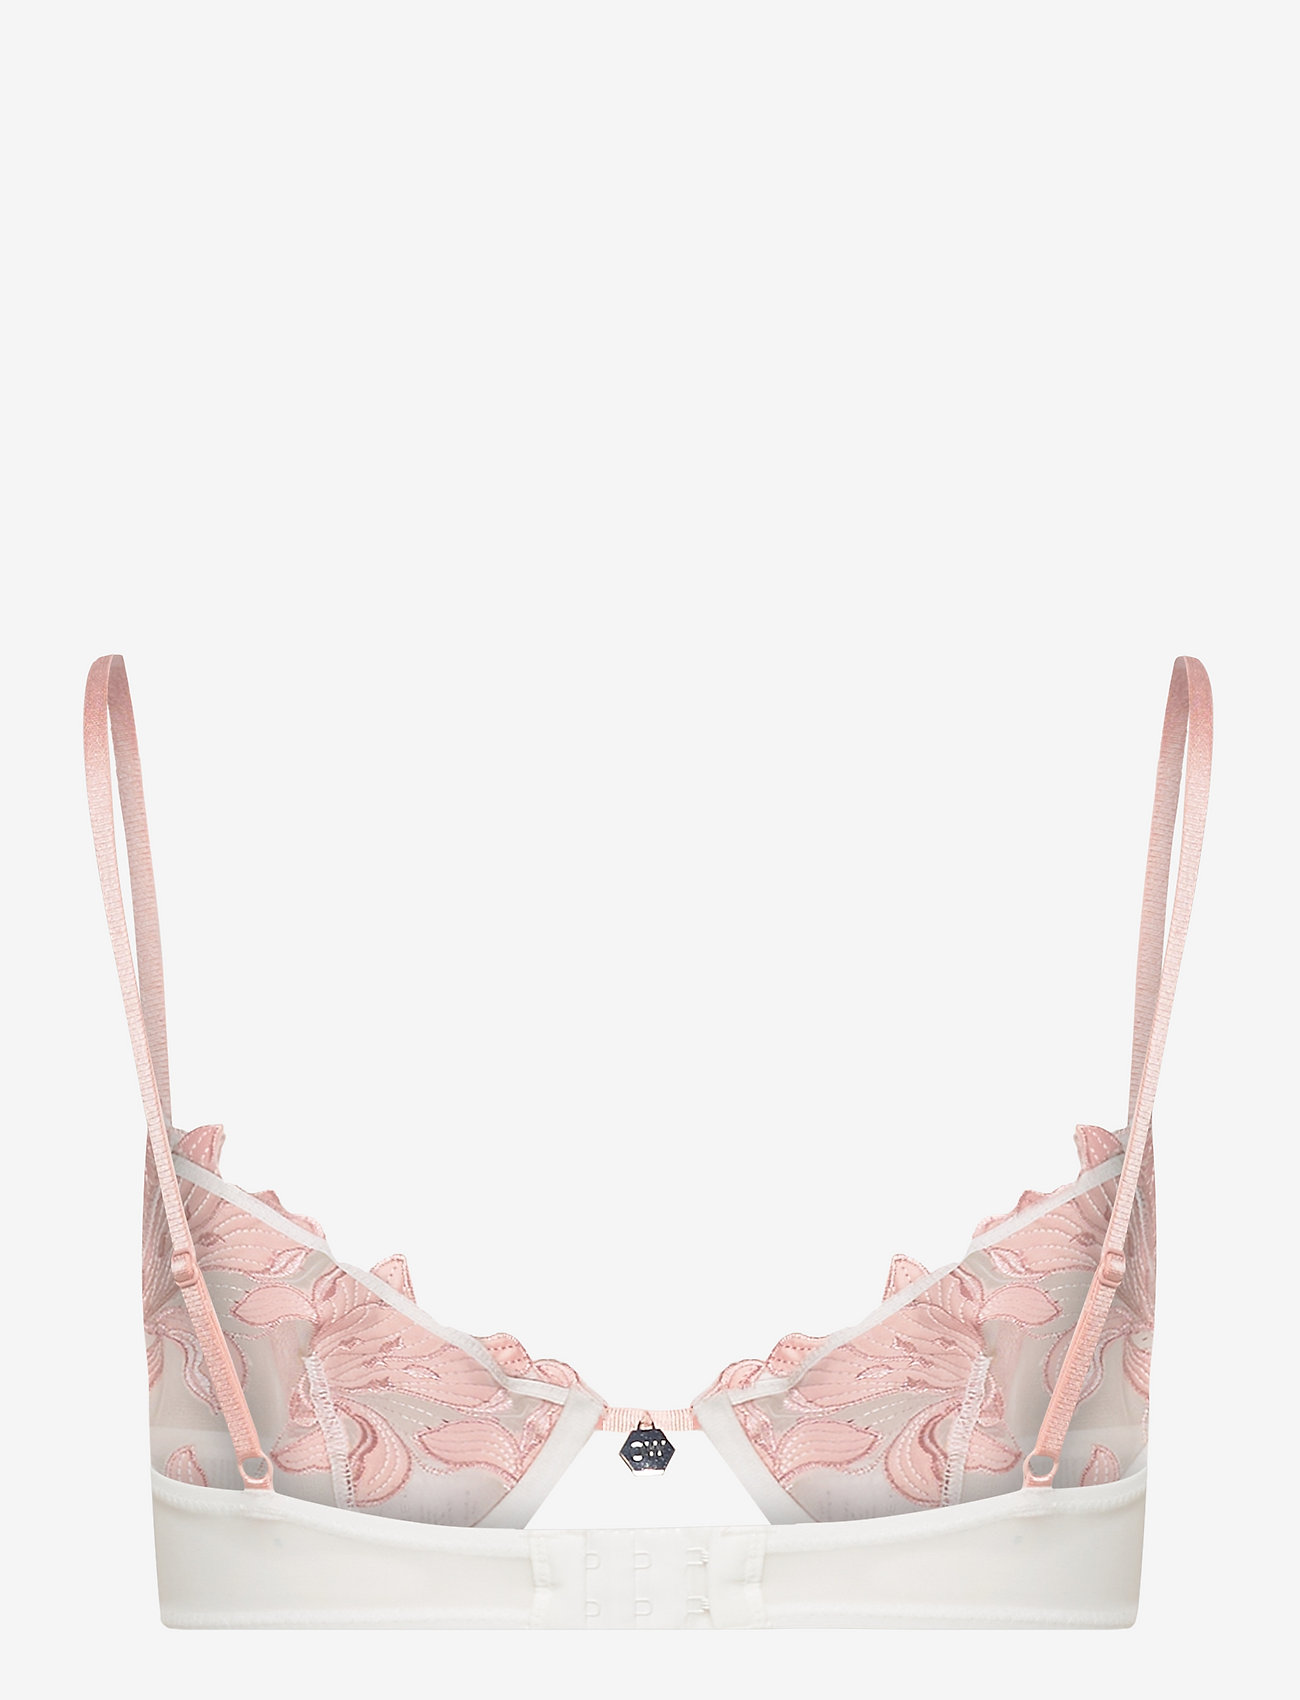 OW Collection - LILIAN Bra - balconette bhs - strawberry - 1